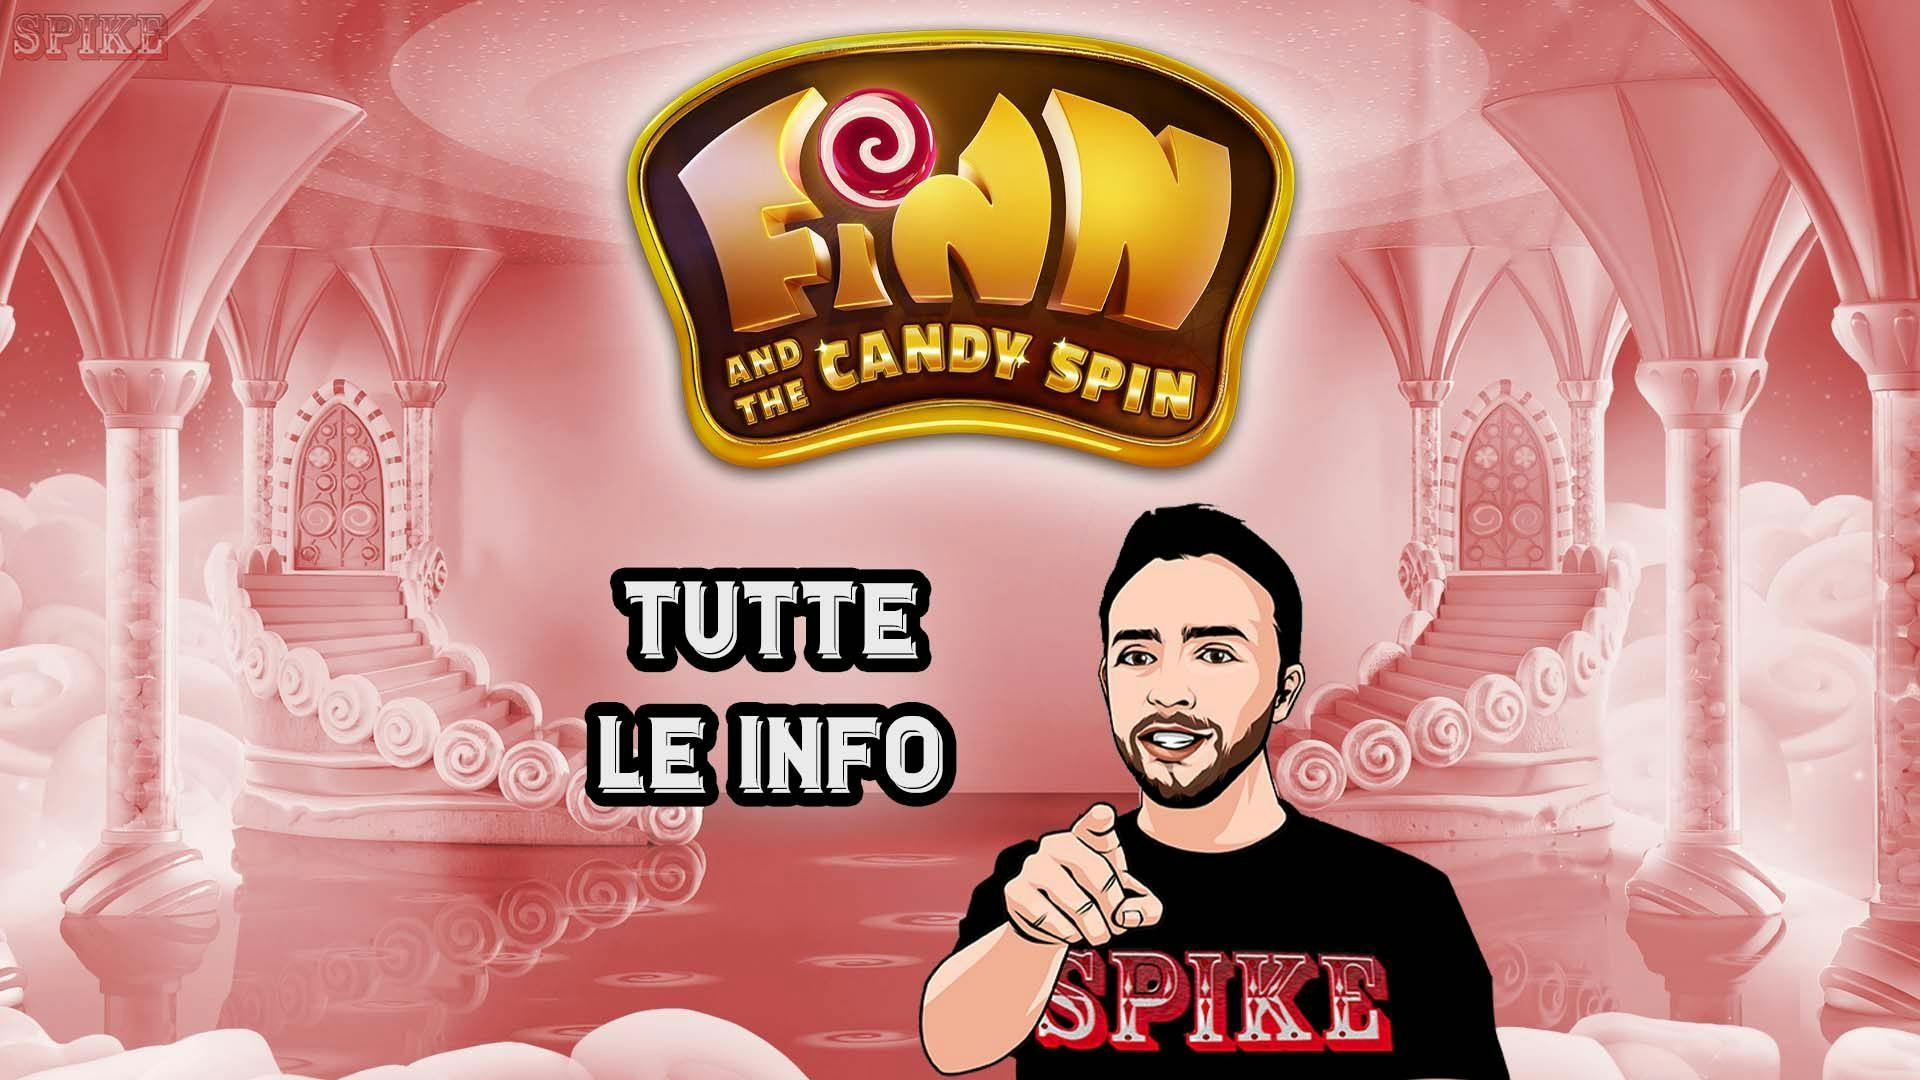 Finn And The Candy Spin Nuova Slot